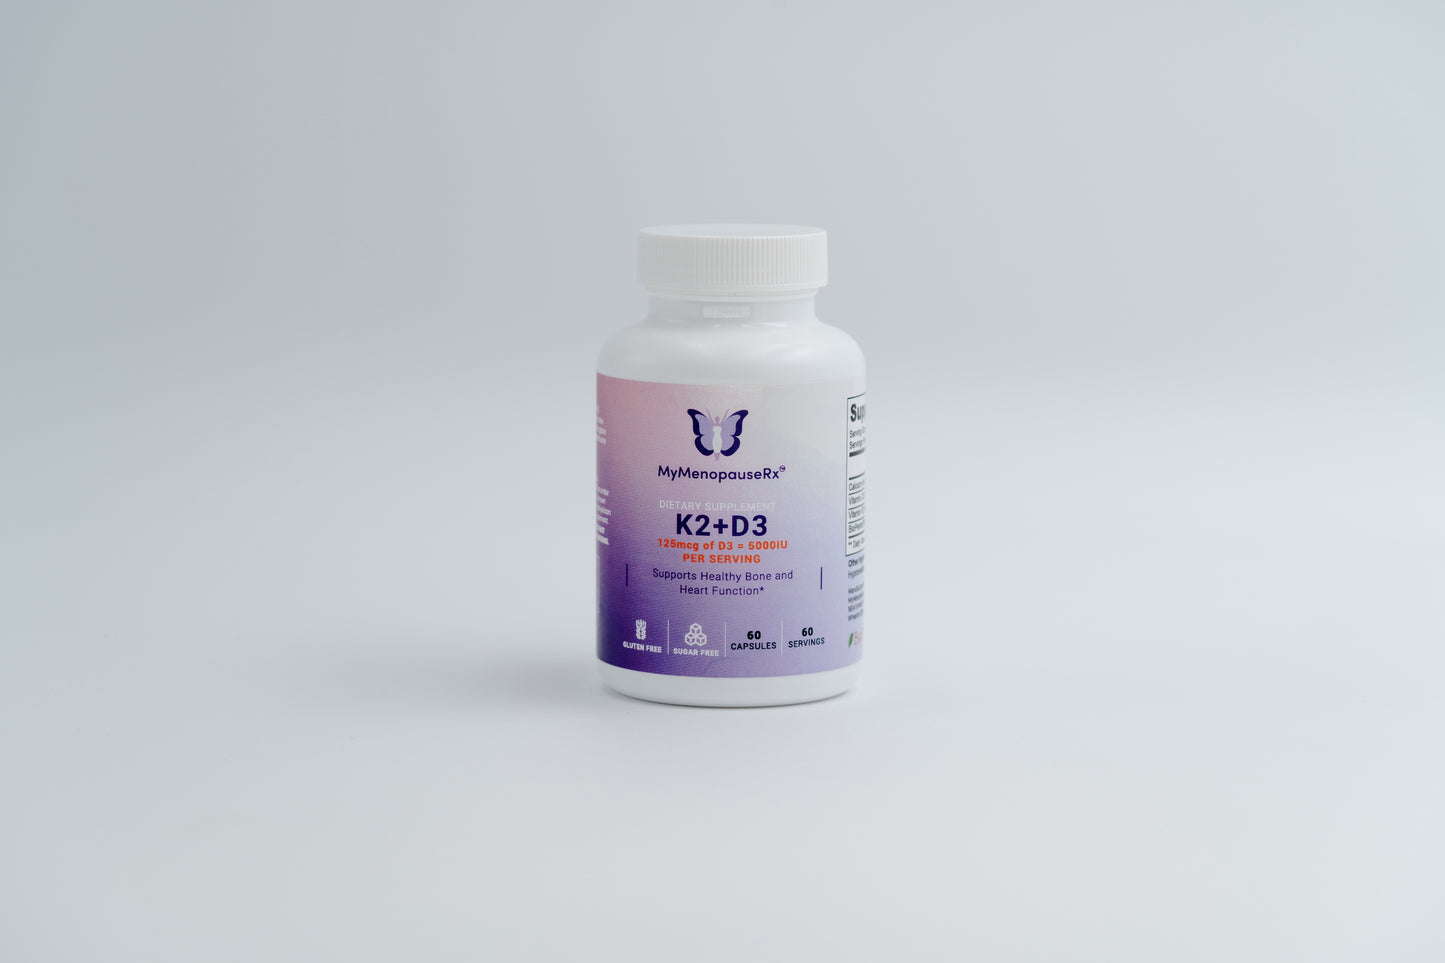 Vitamin K2 and D3